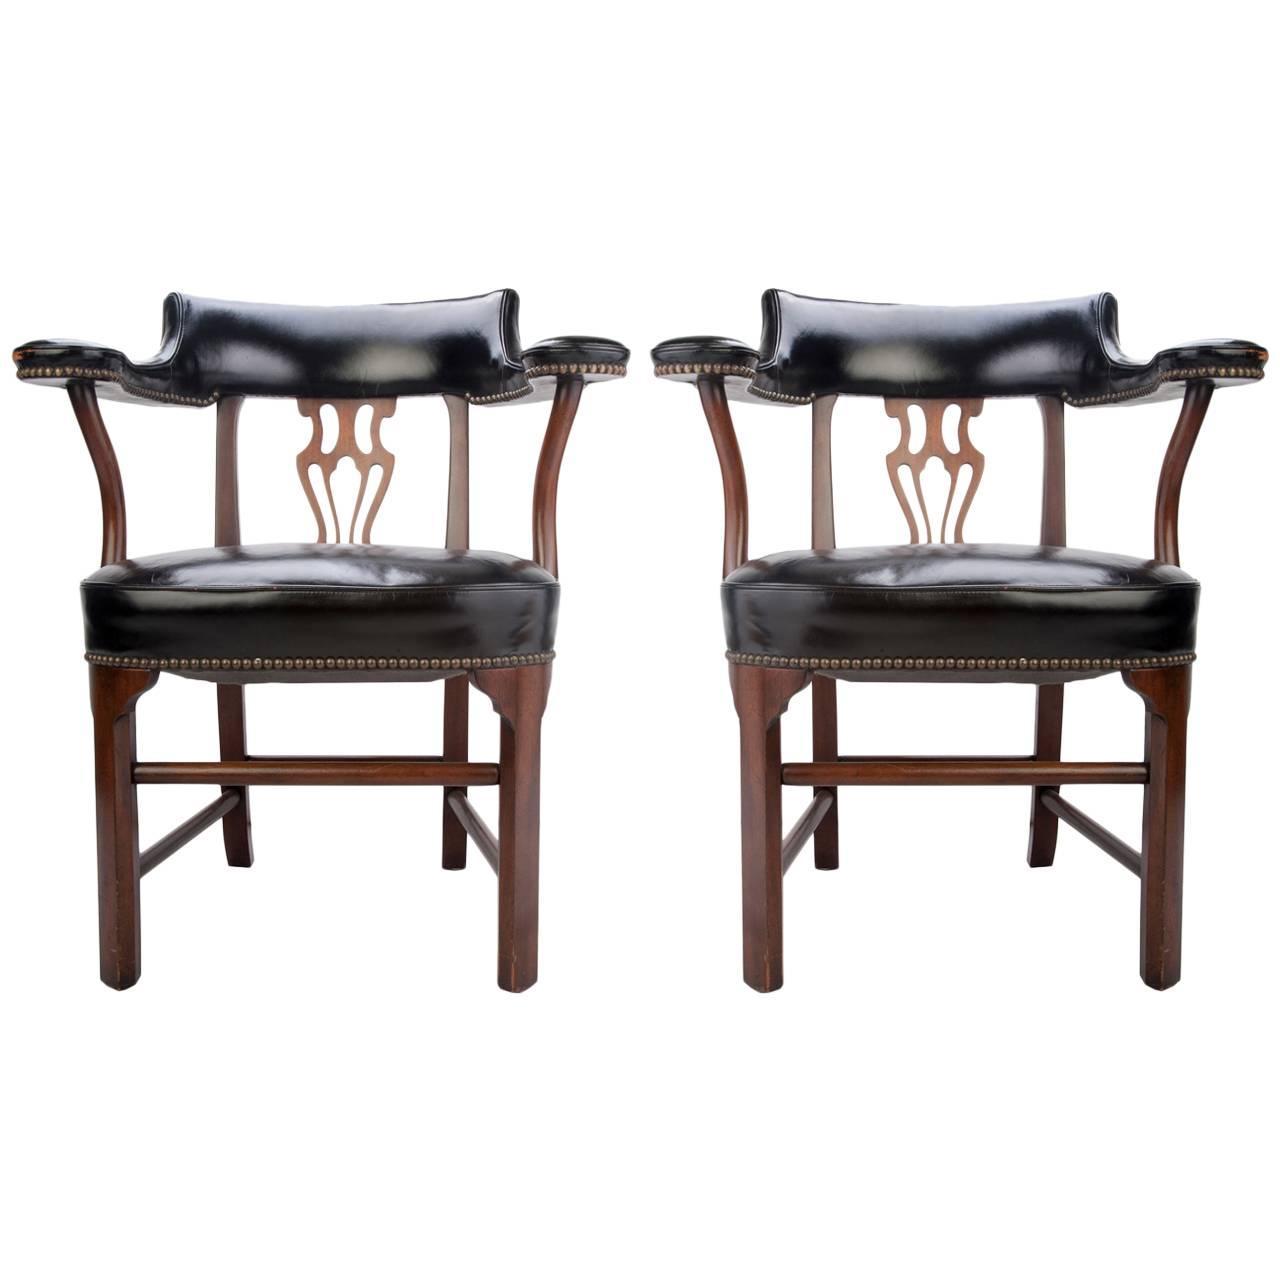 Kittinger Leather Bankers' Chairs at 1stdibs